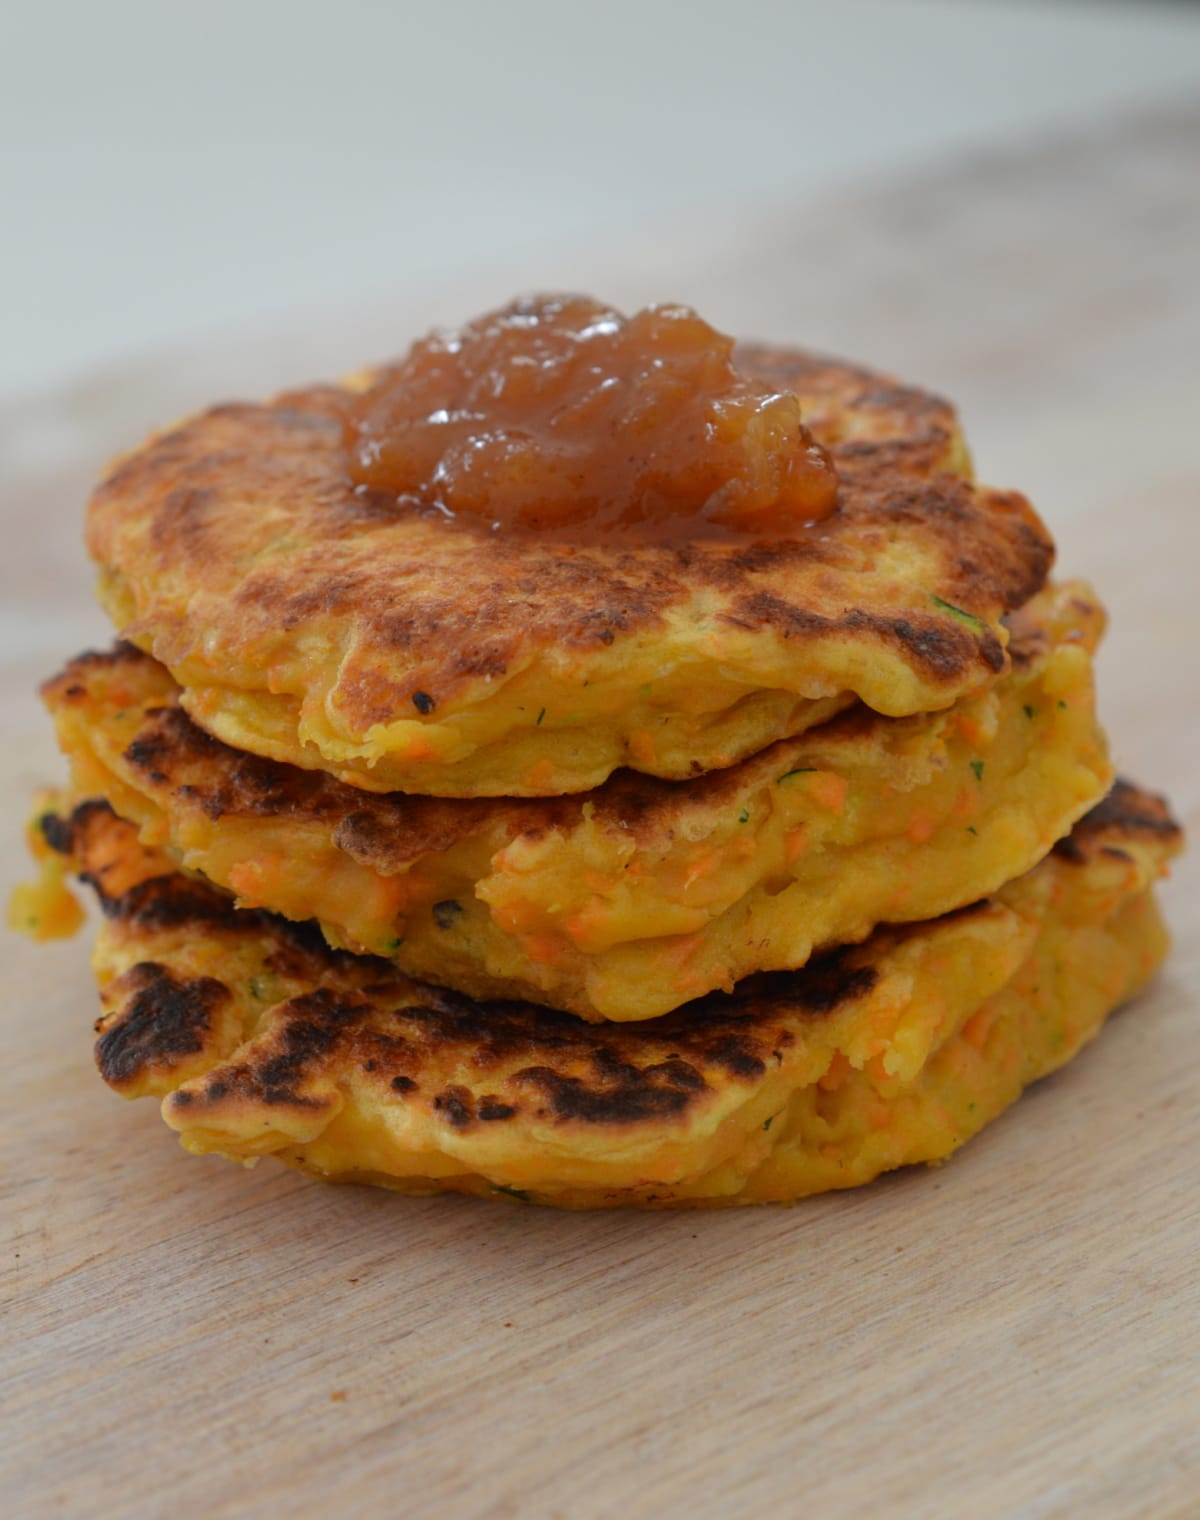 Three sweet potato fritters on a wooden plate, they are topped with homemade tomato relish.